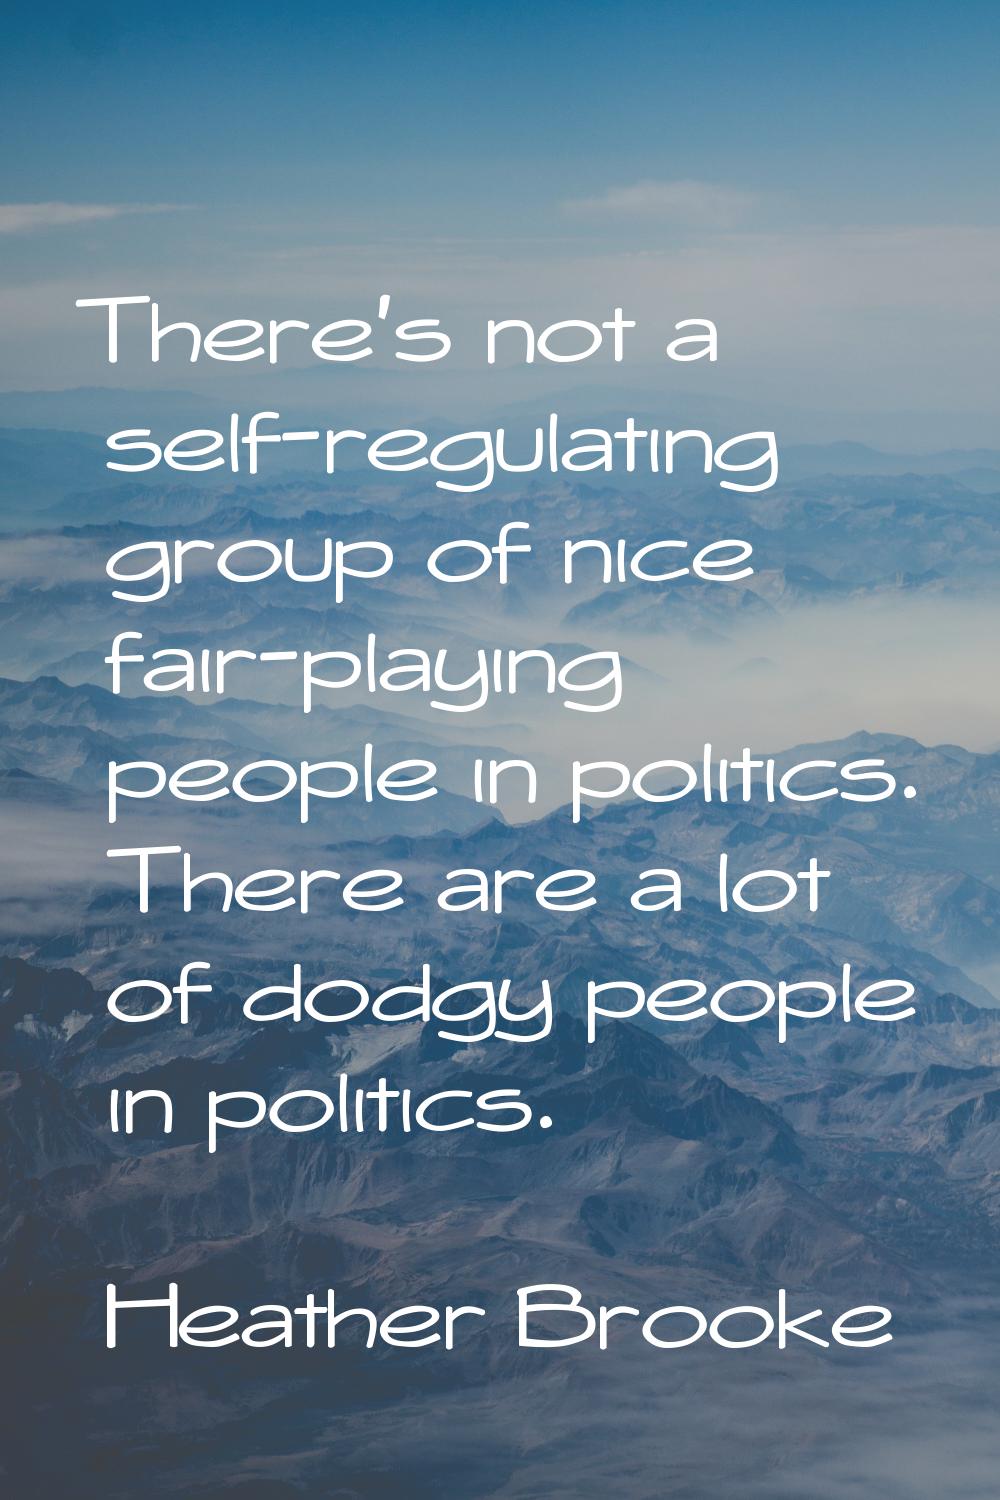 There's not a self-regulating group of nice fair-playing people in politics. There are a lot of dod